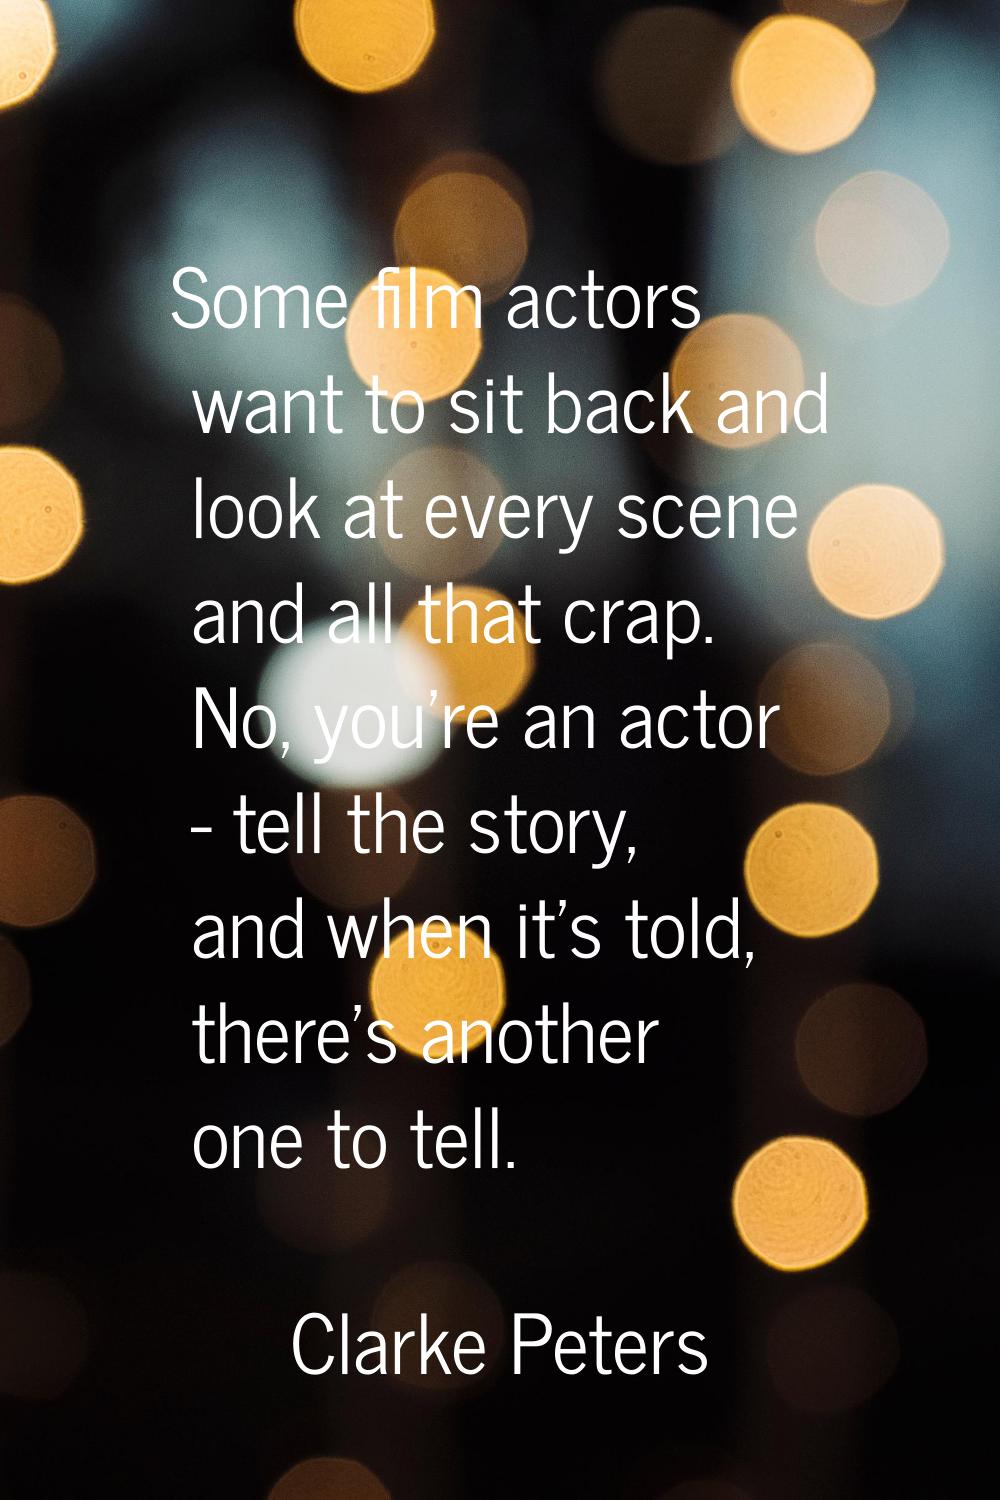 Some film actors want to sit back and look at every scene and all that crap. No, you're an actor - 